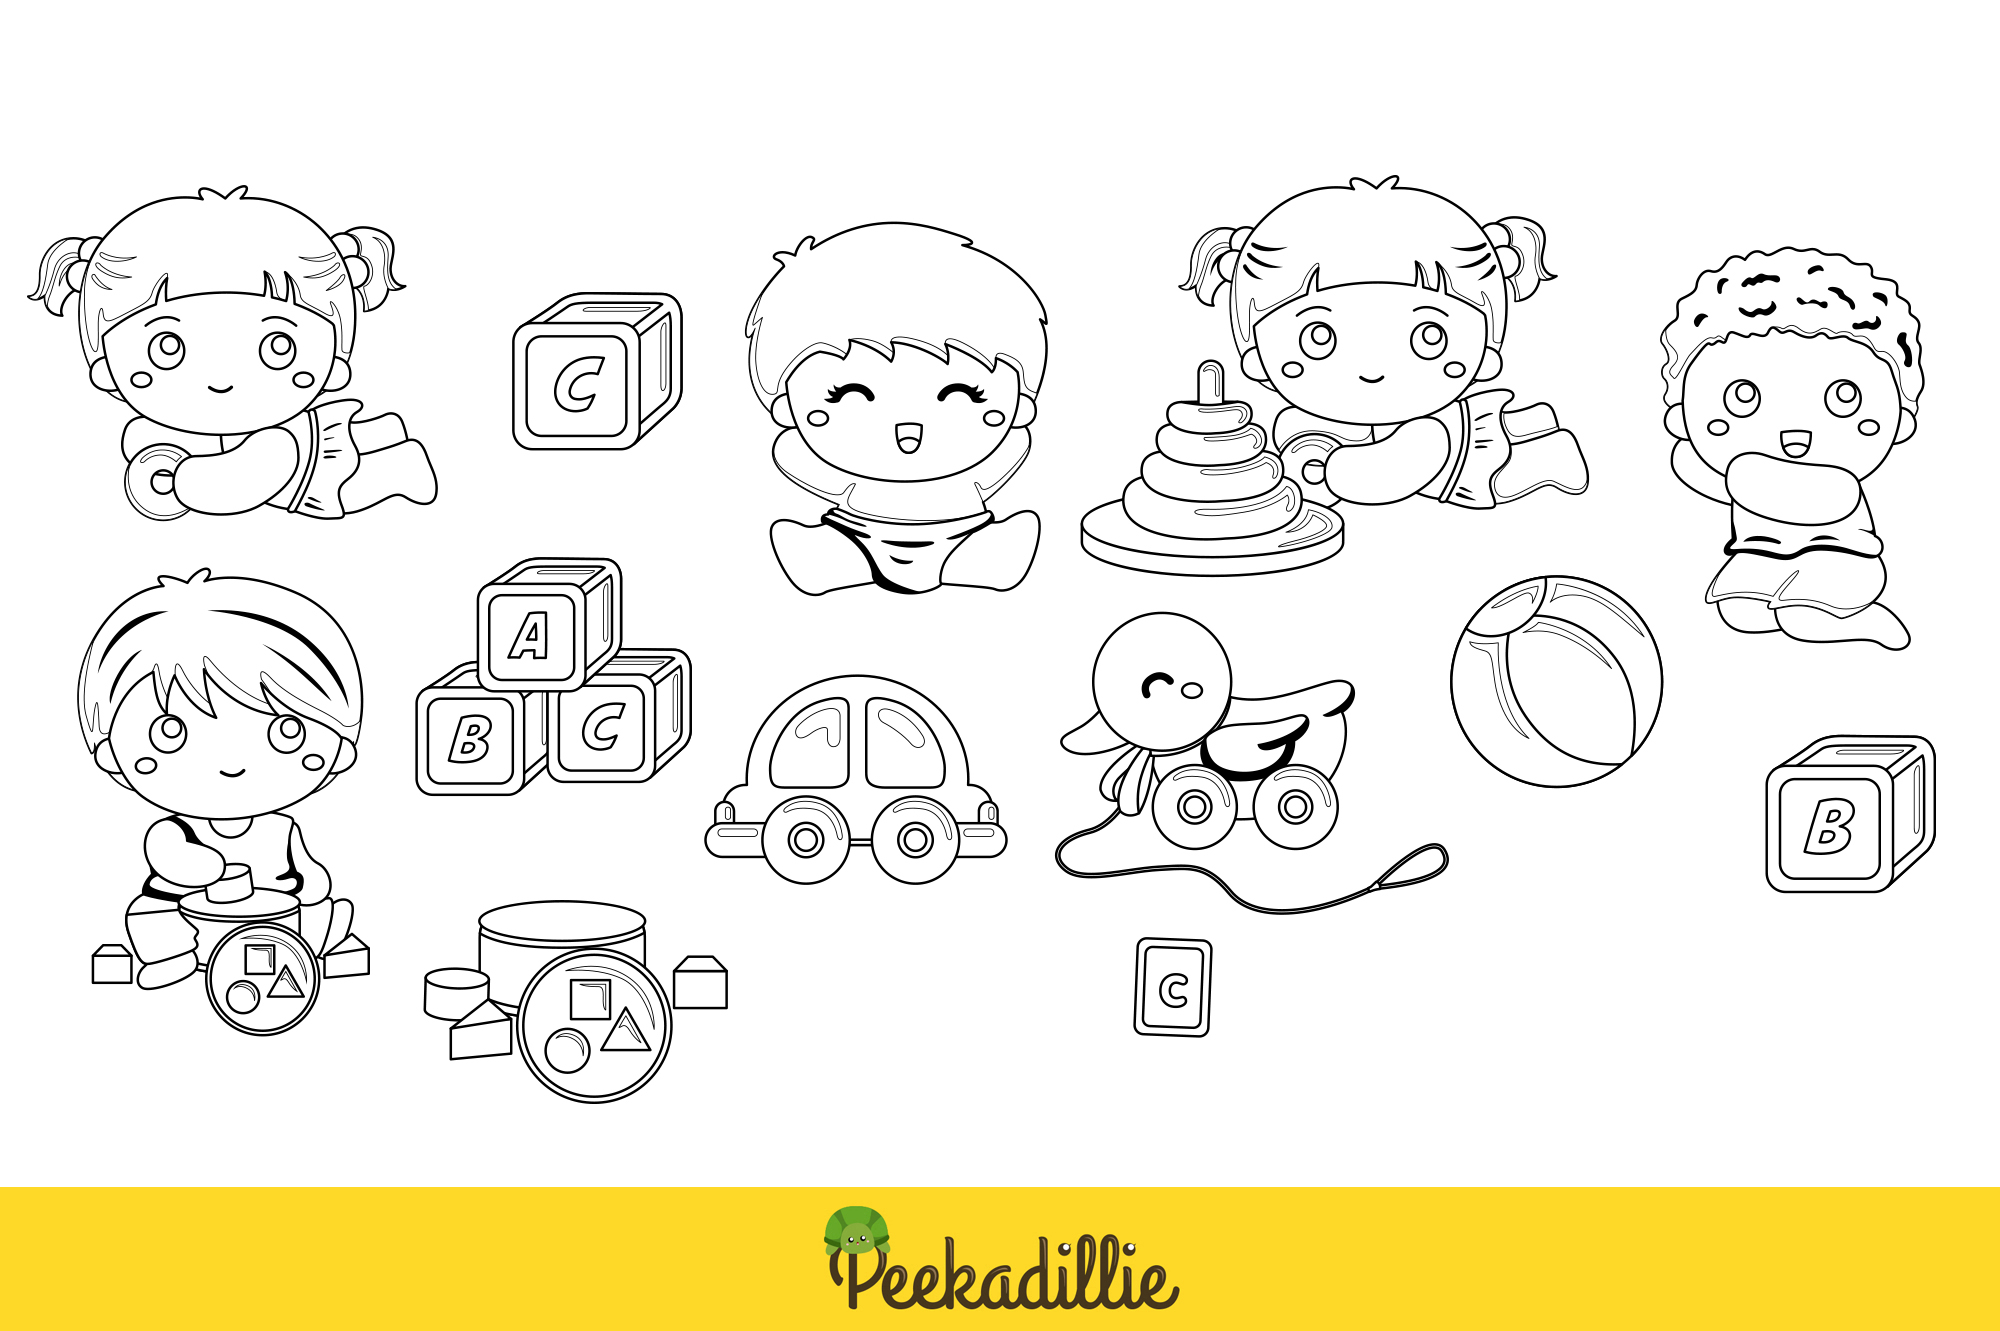 Diverse of babies and their toys in an outline.